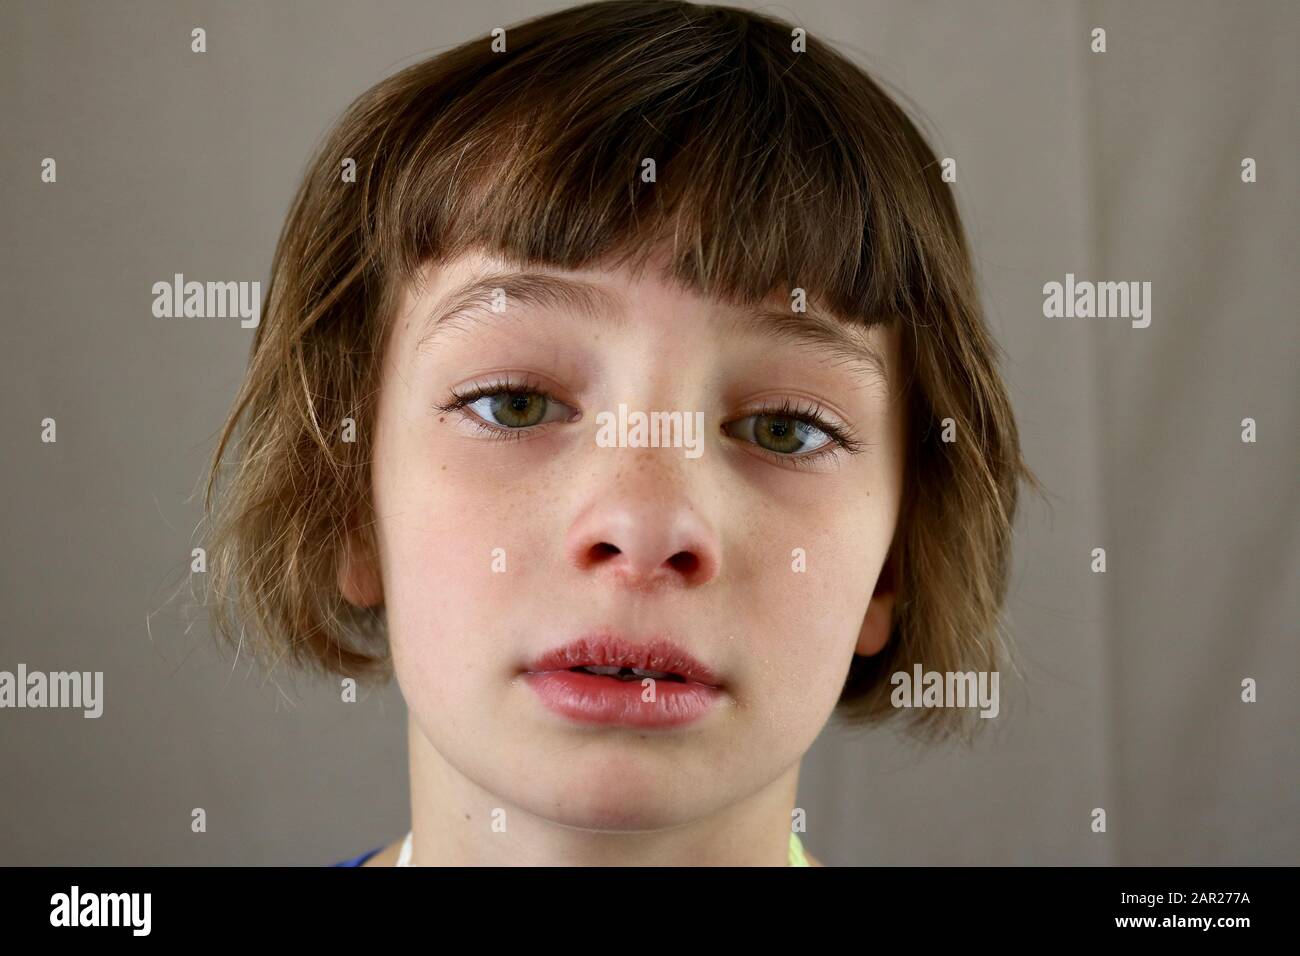 Portrait of a sick child with a sore nose and chapped lips Stock Photo